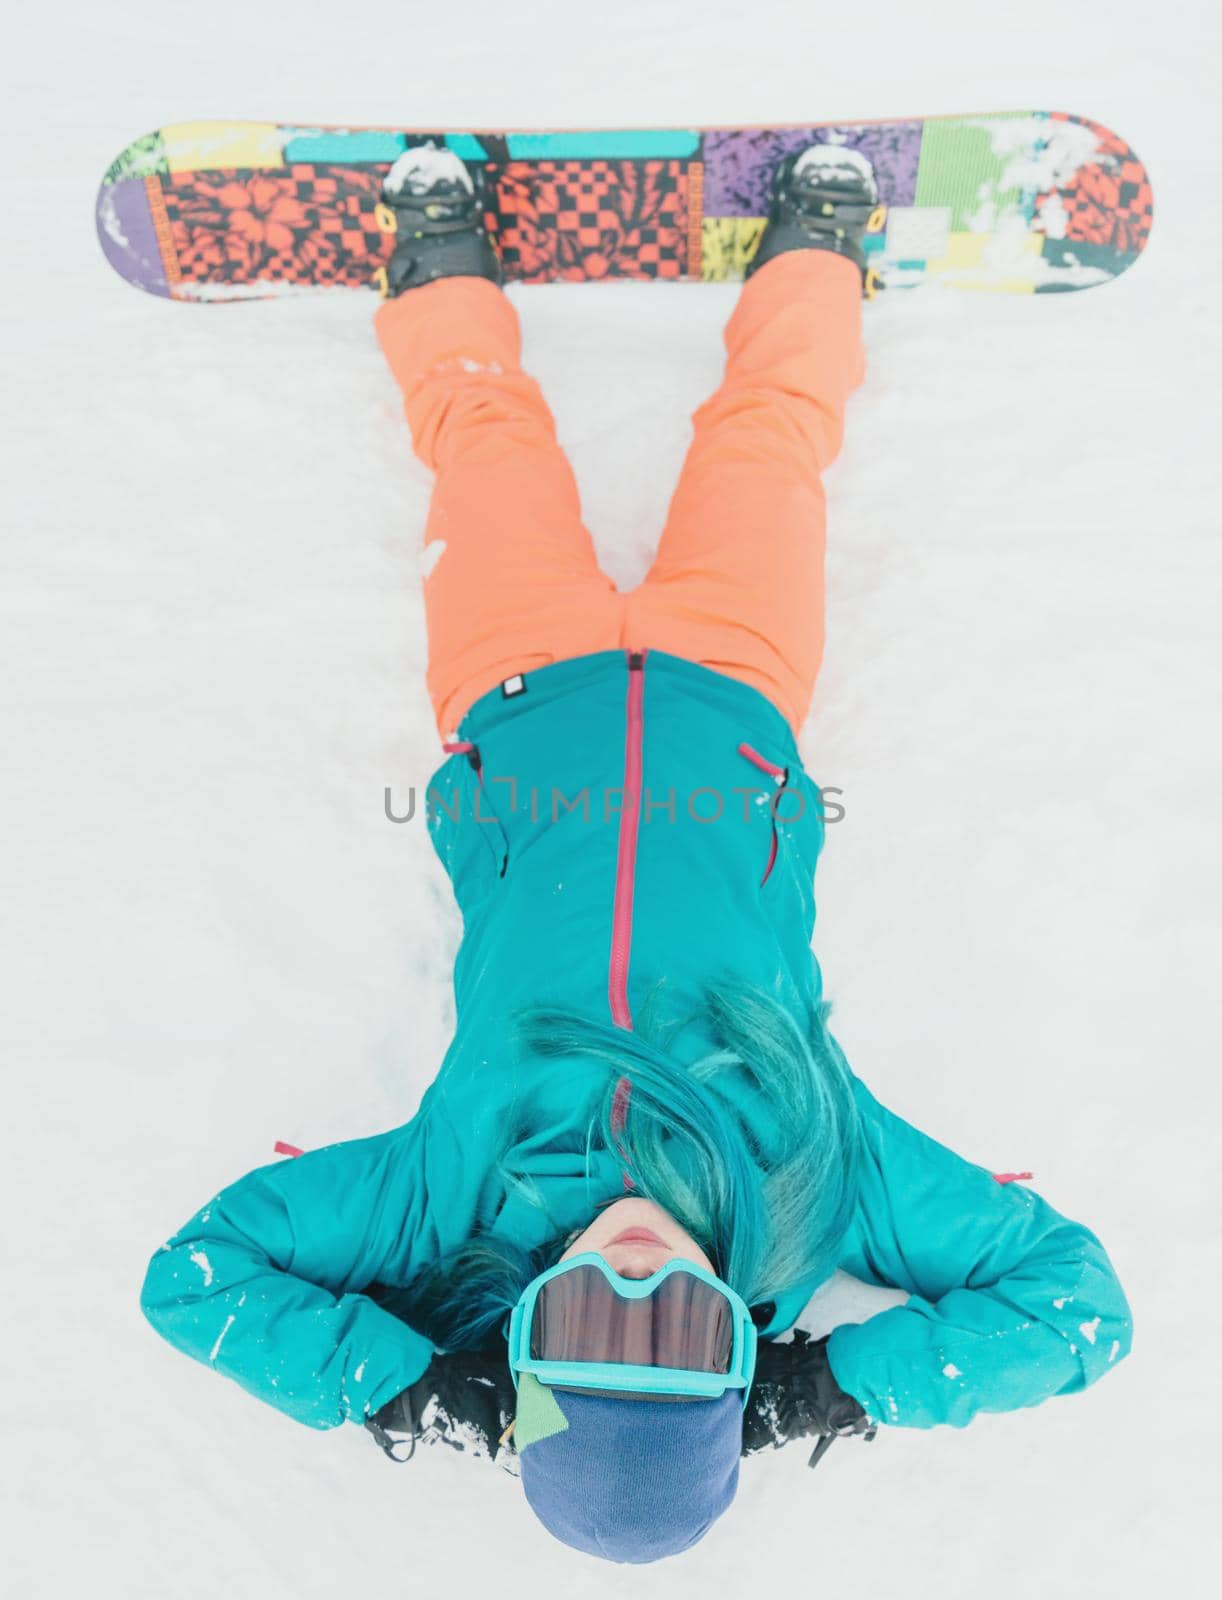 Woman with snowboard lying on snow by alexAleksei